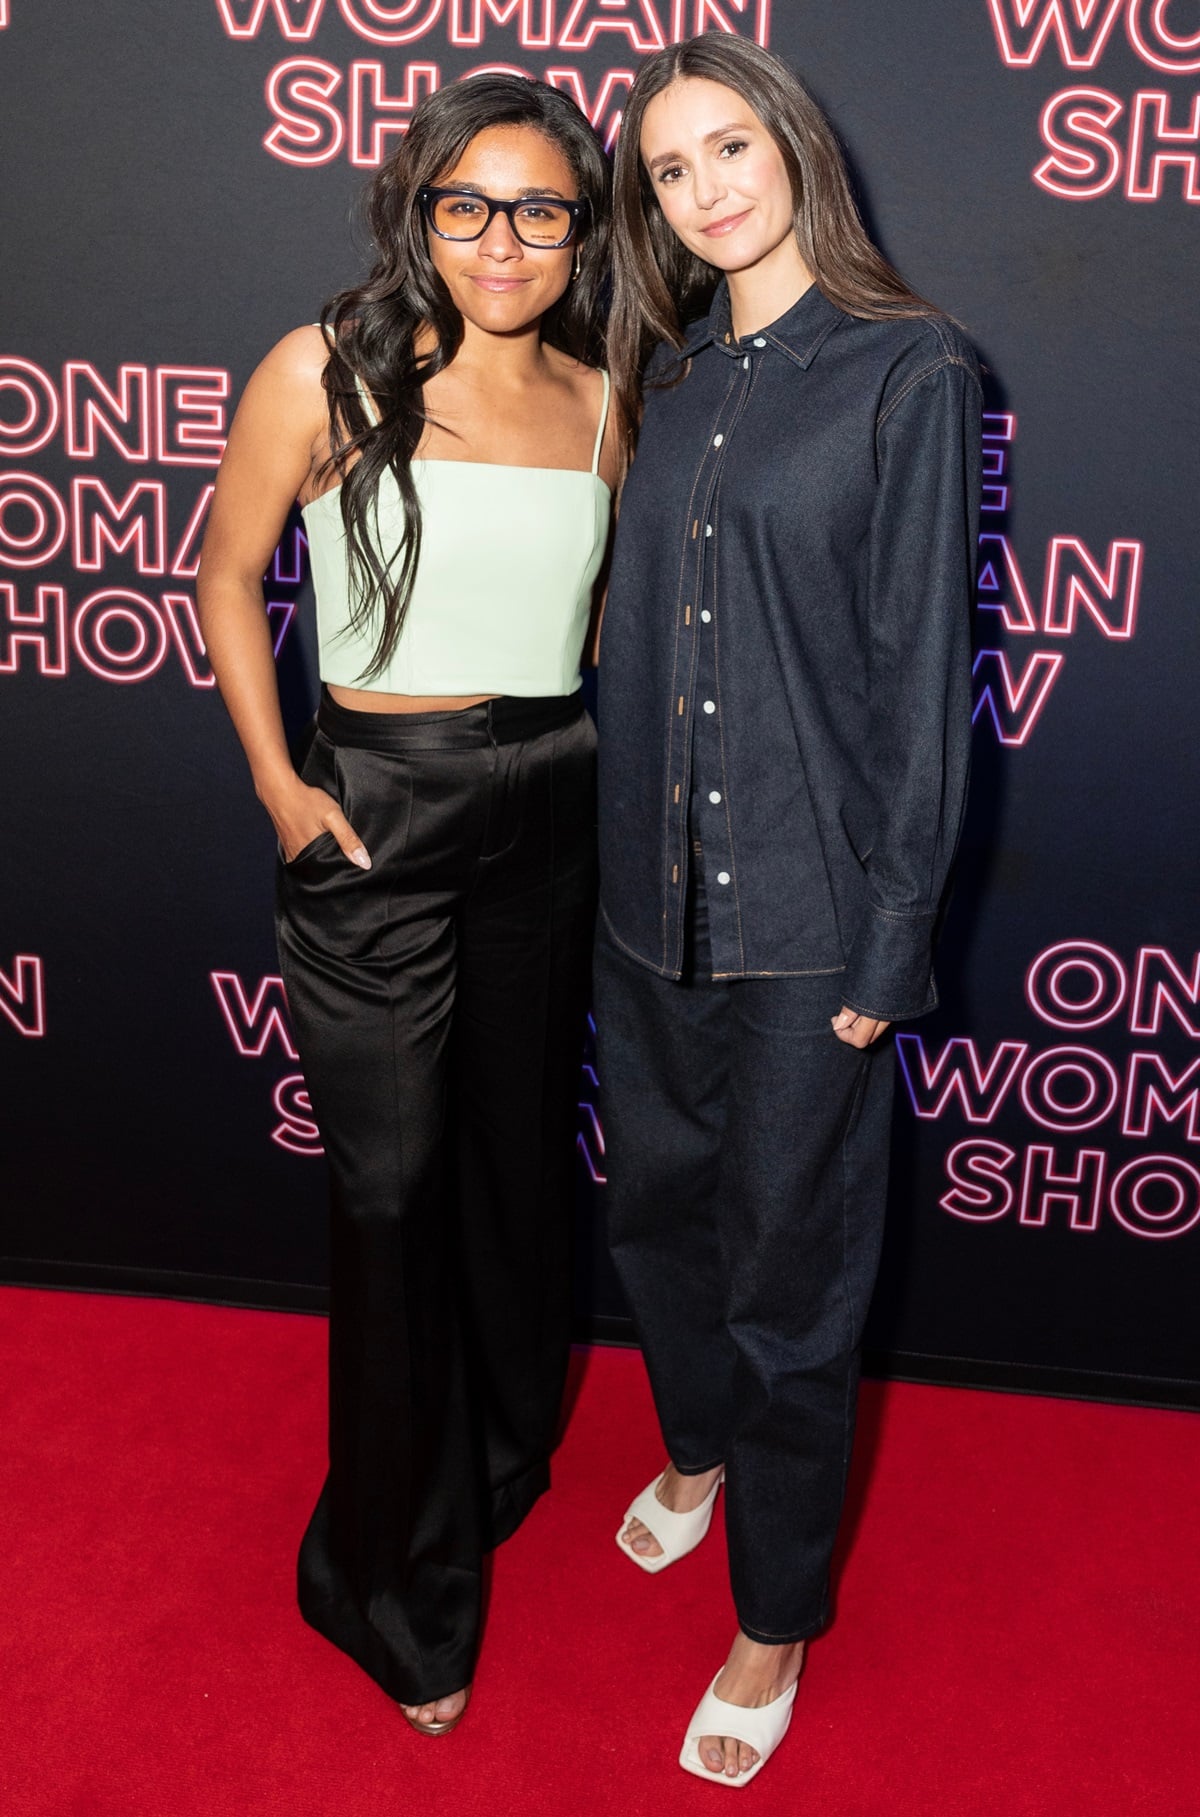 Ariana DeBose is shorter with a height of 5 feet 3 inches (160 cm) compared to Nina Dobrev, who stands at 5 feet 5 ¼ inches (165.7 cm)